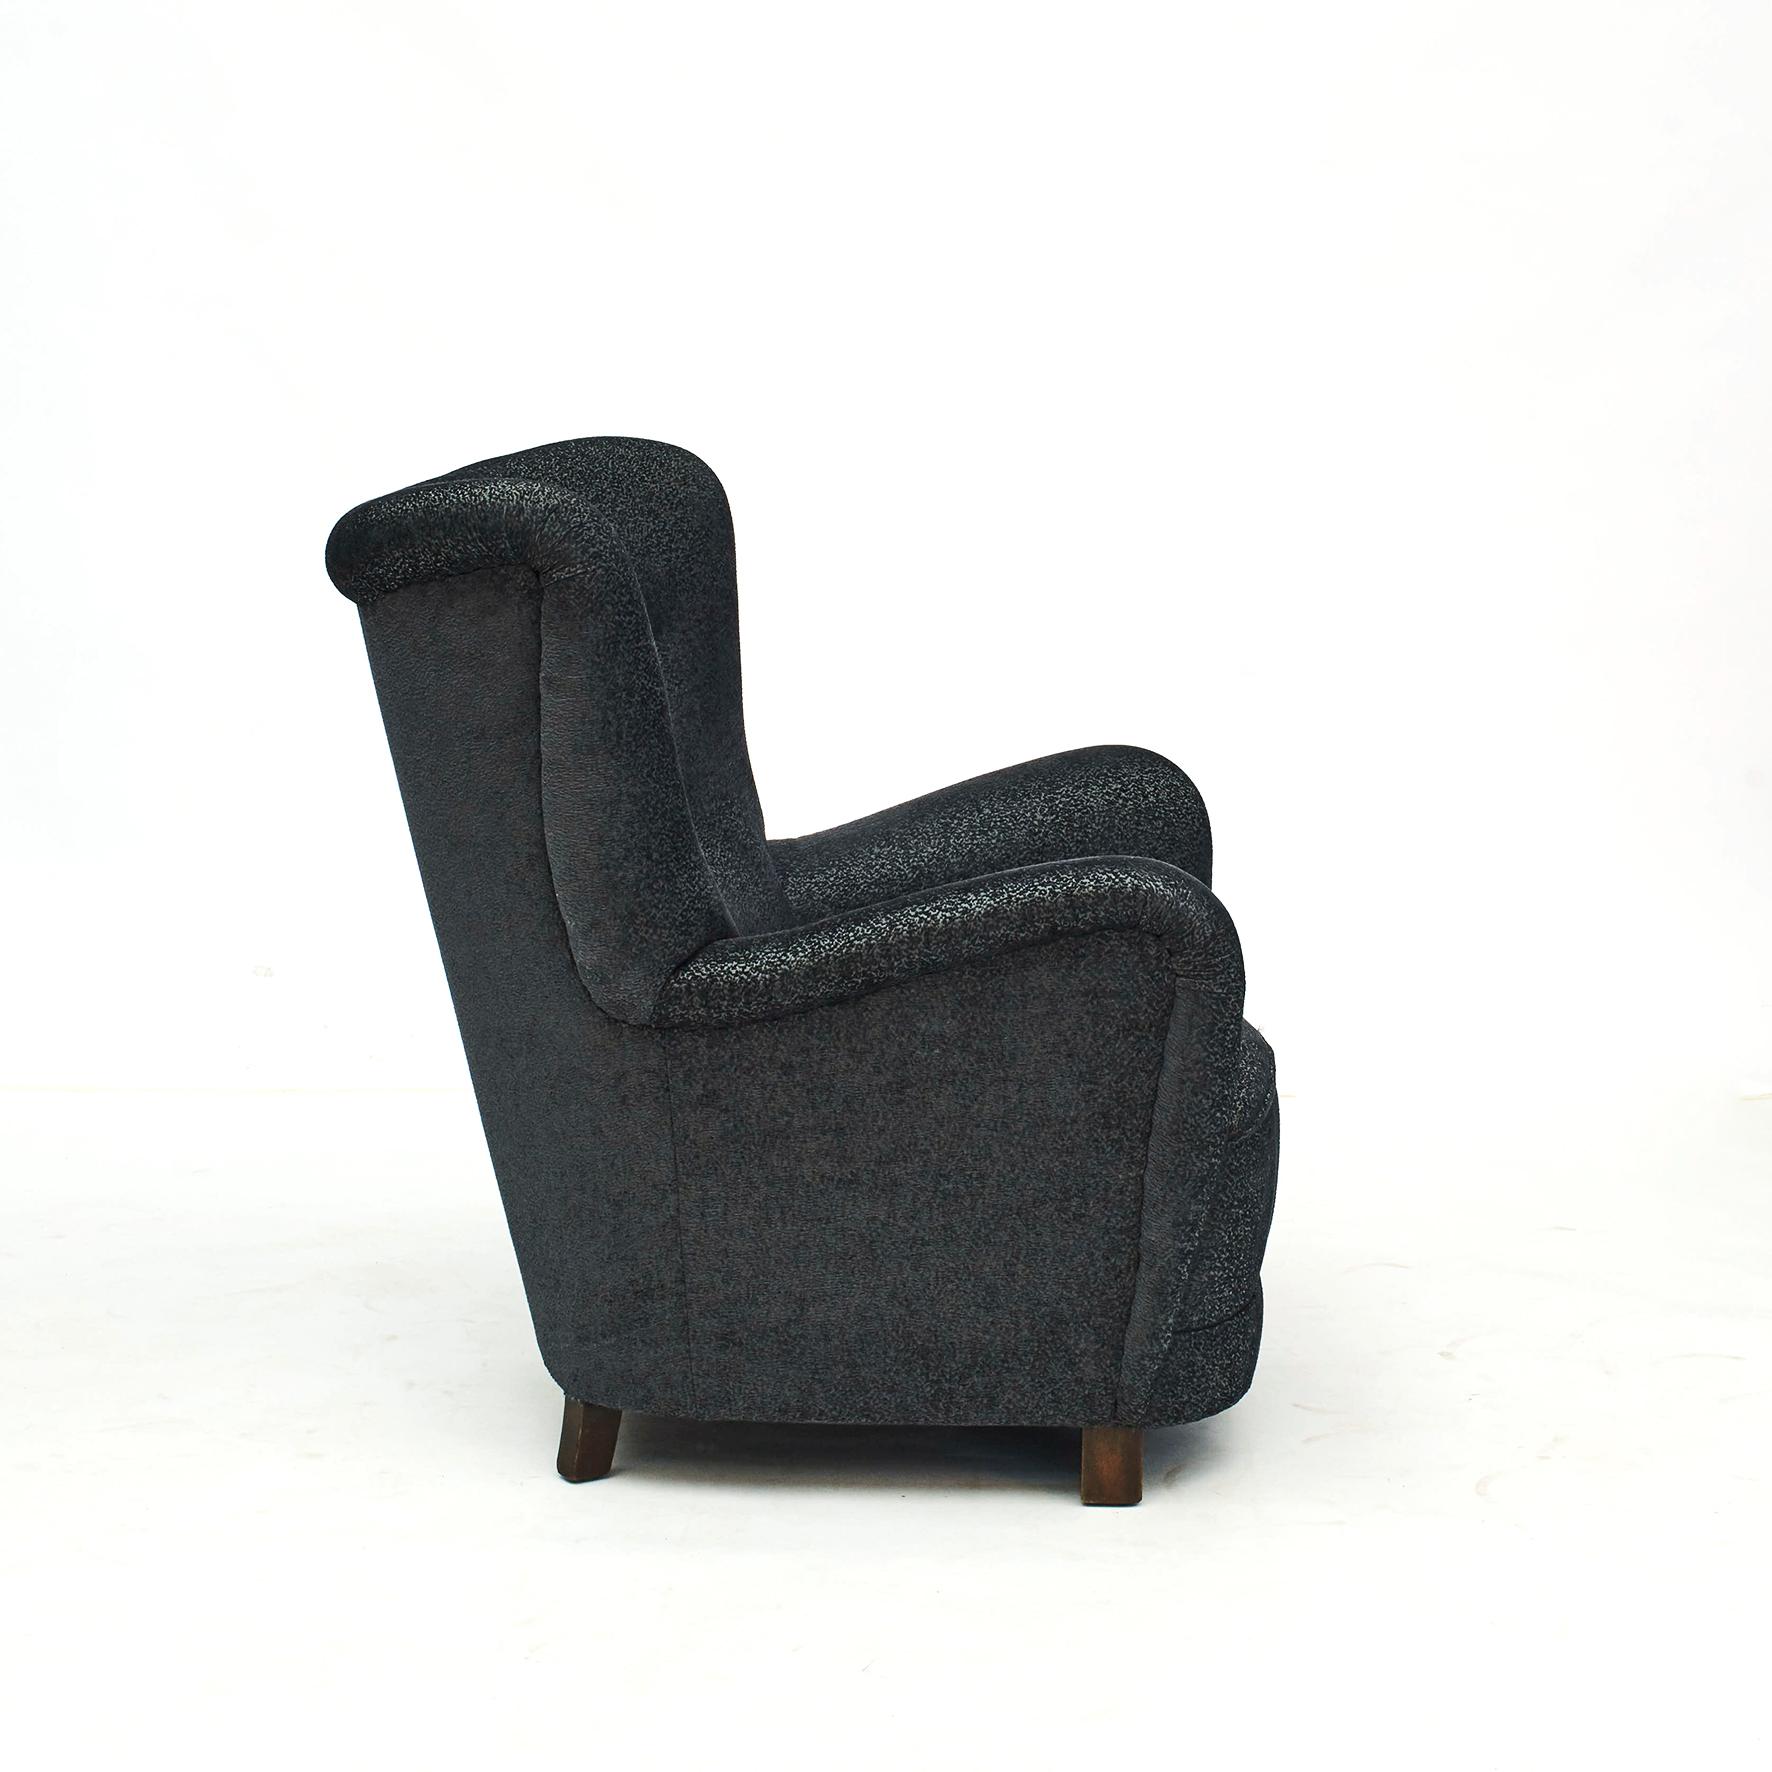 Danish easy chair, 1940-1950.
The seat with coil springs, legs in dark polished beech.
Professionally reupholstered in beautiful lead gray fabric from Larsen.

Very comfortable and in great condition.